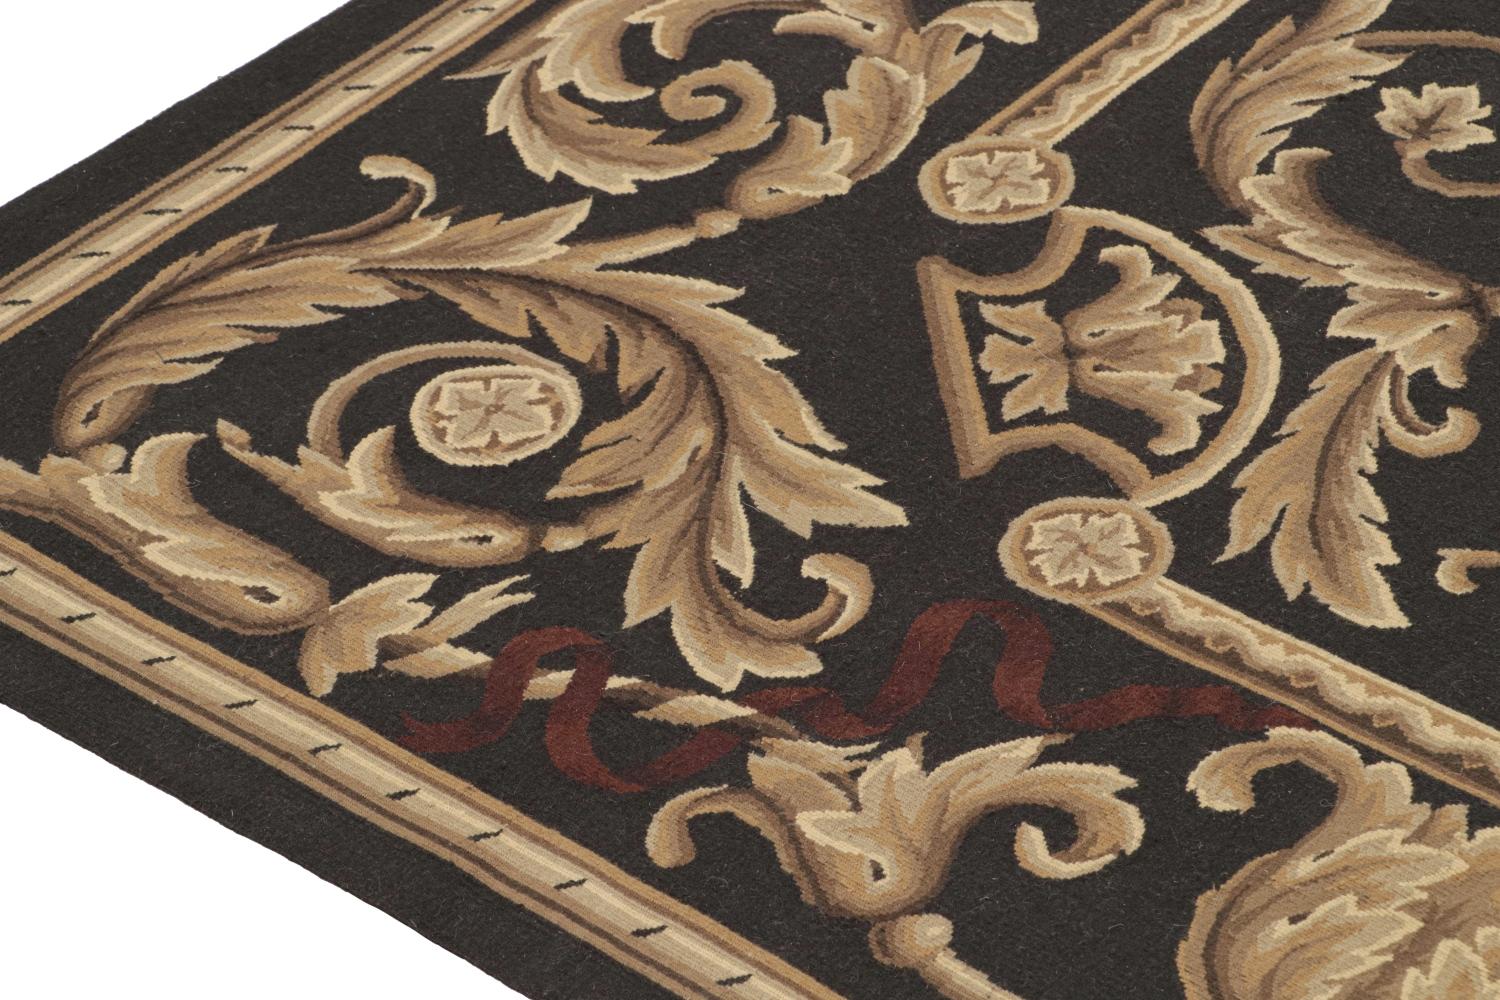 Chinese Rug & Kilim’s Aubusson Style Flatweave in Brown with Medallion & Floral Patterns For Sale